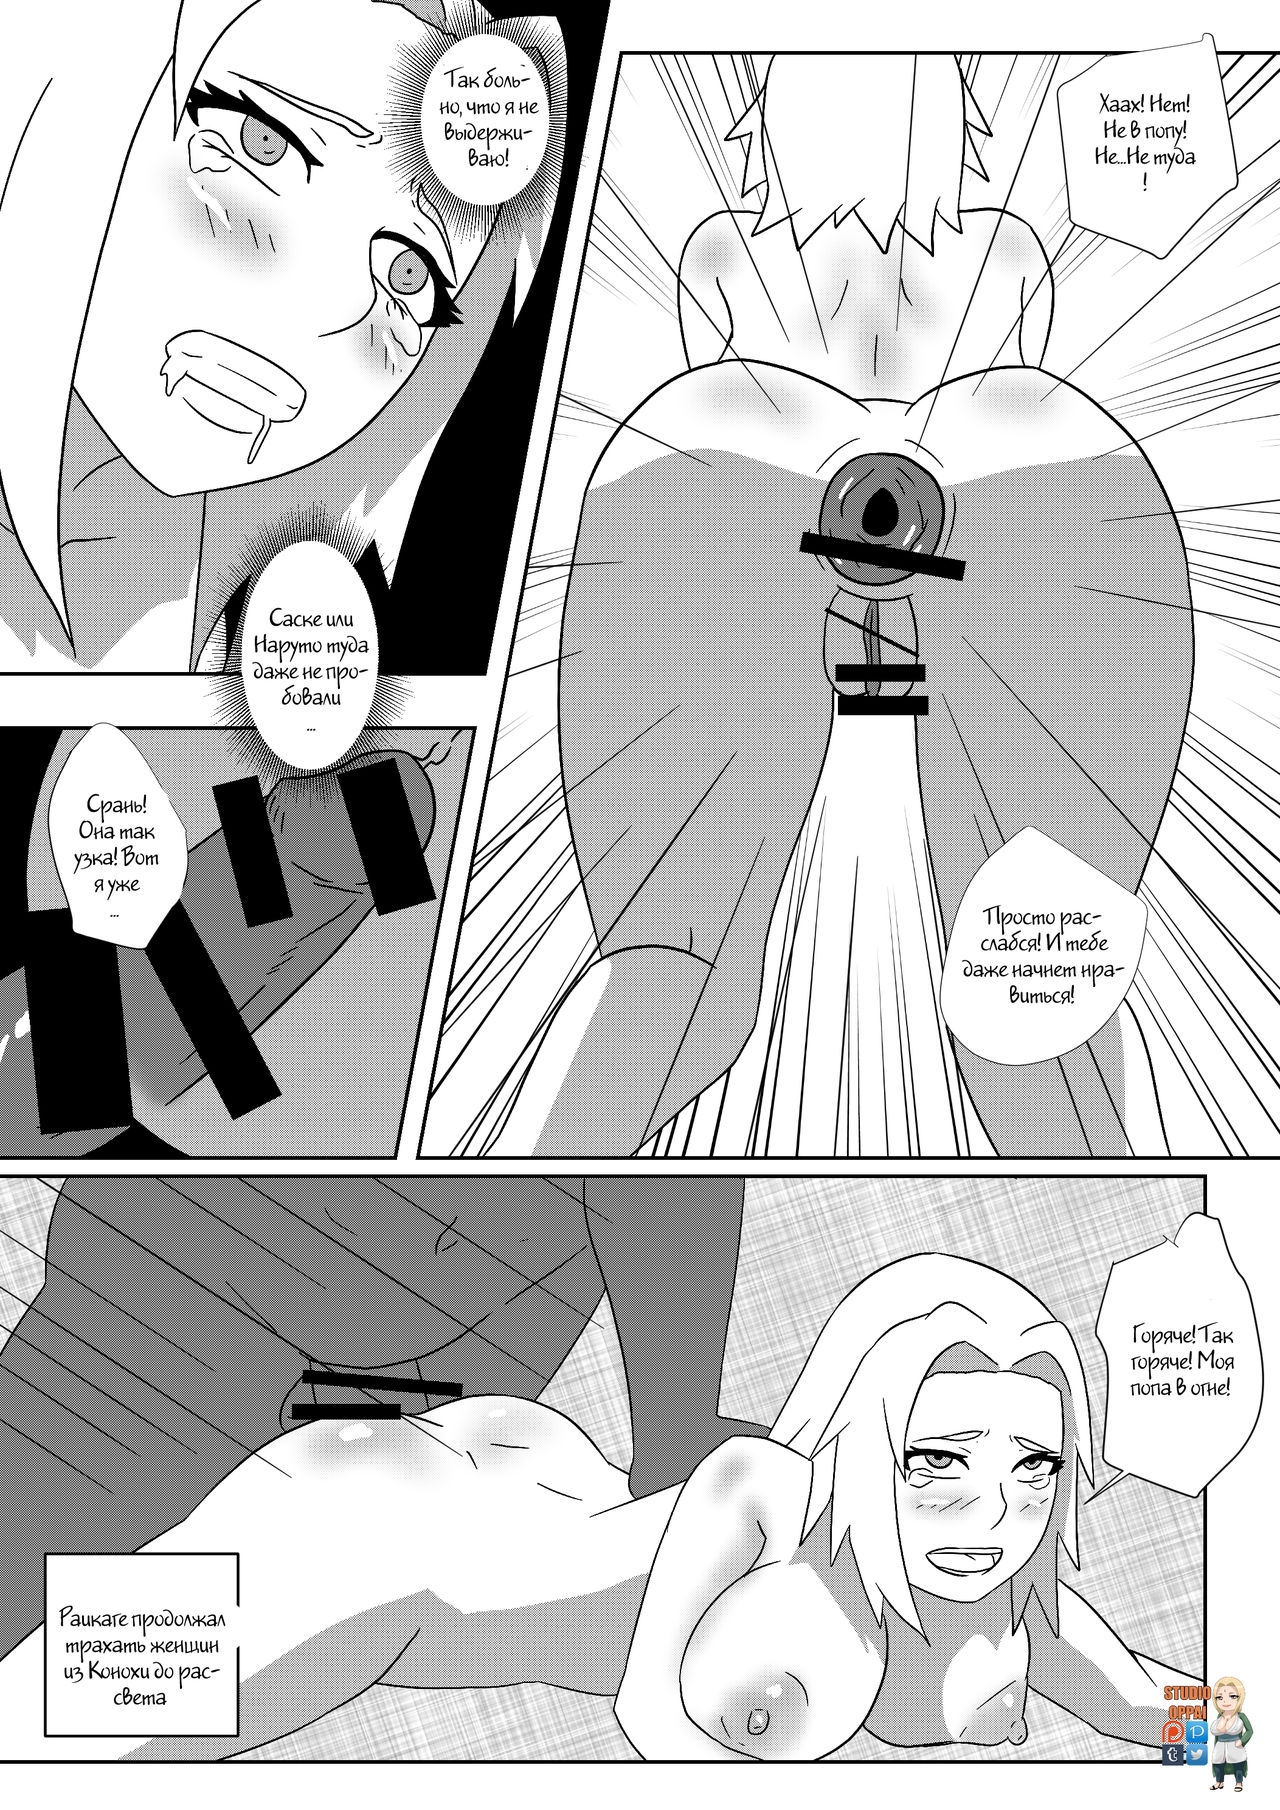 [Studio Oppai] Negotiations with Raikage (Naruto) [Russian] [Witcher000] 9